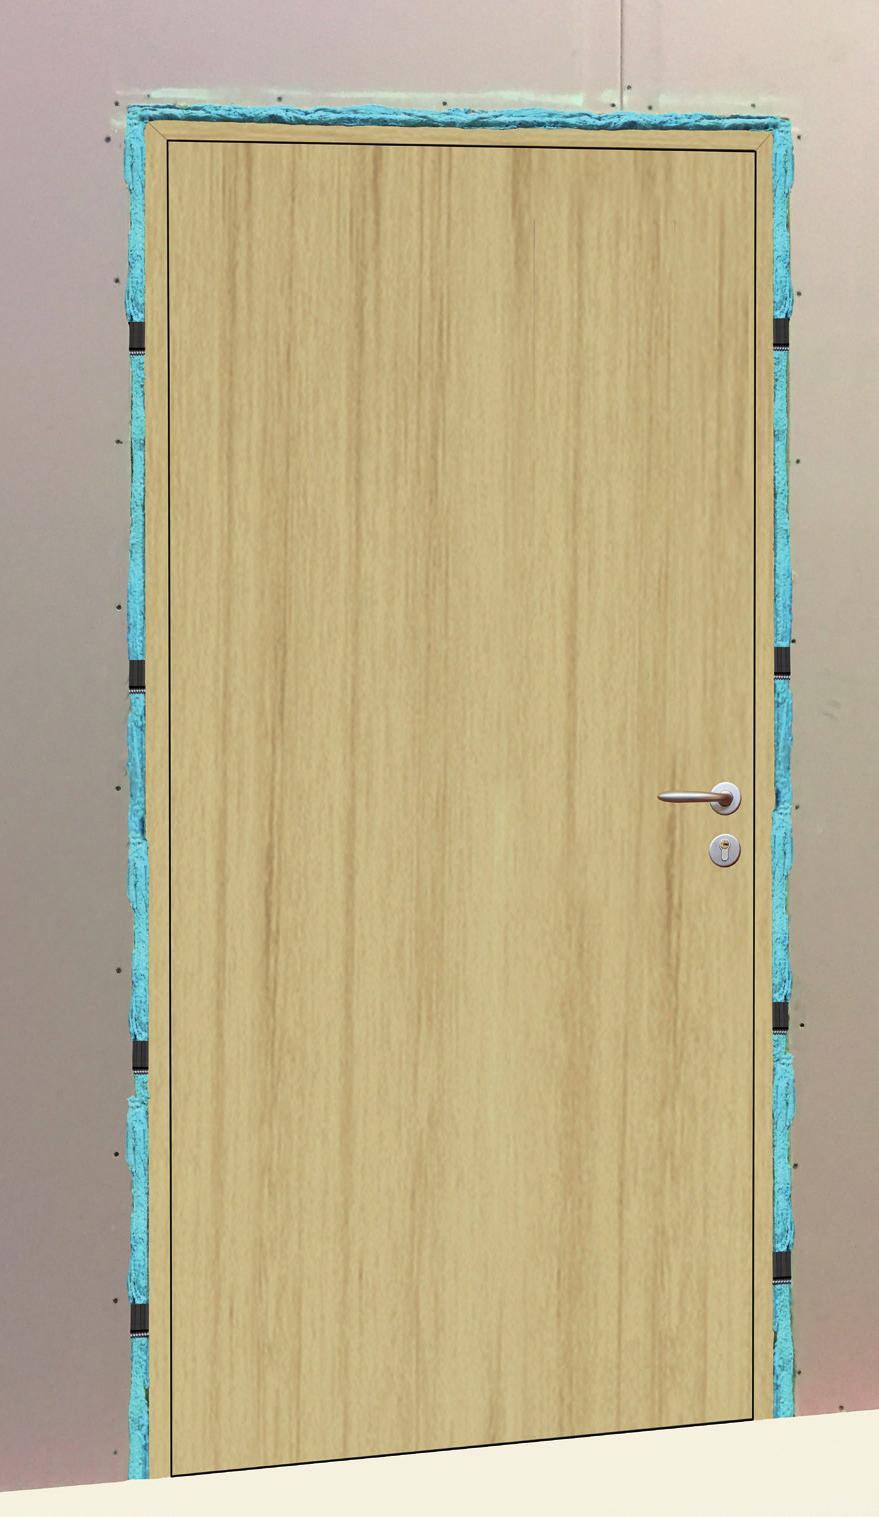 Installation Guide The doorset installation should be in accordance with BS 476: Part 22 / BS EN 1634-1 and manufacturers guidelines.